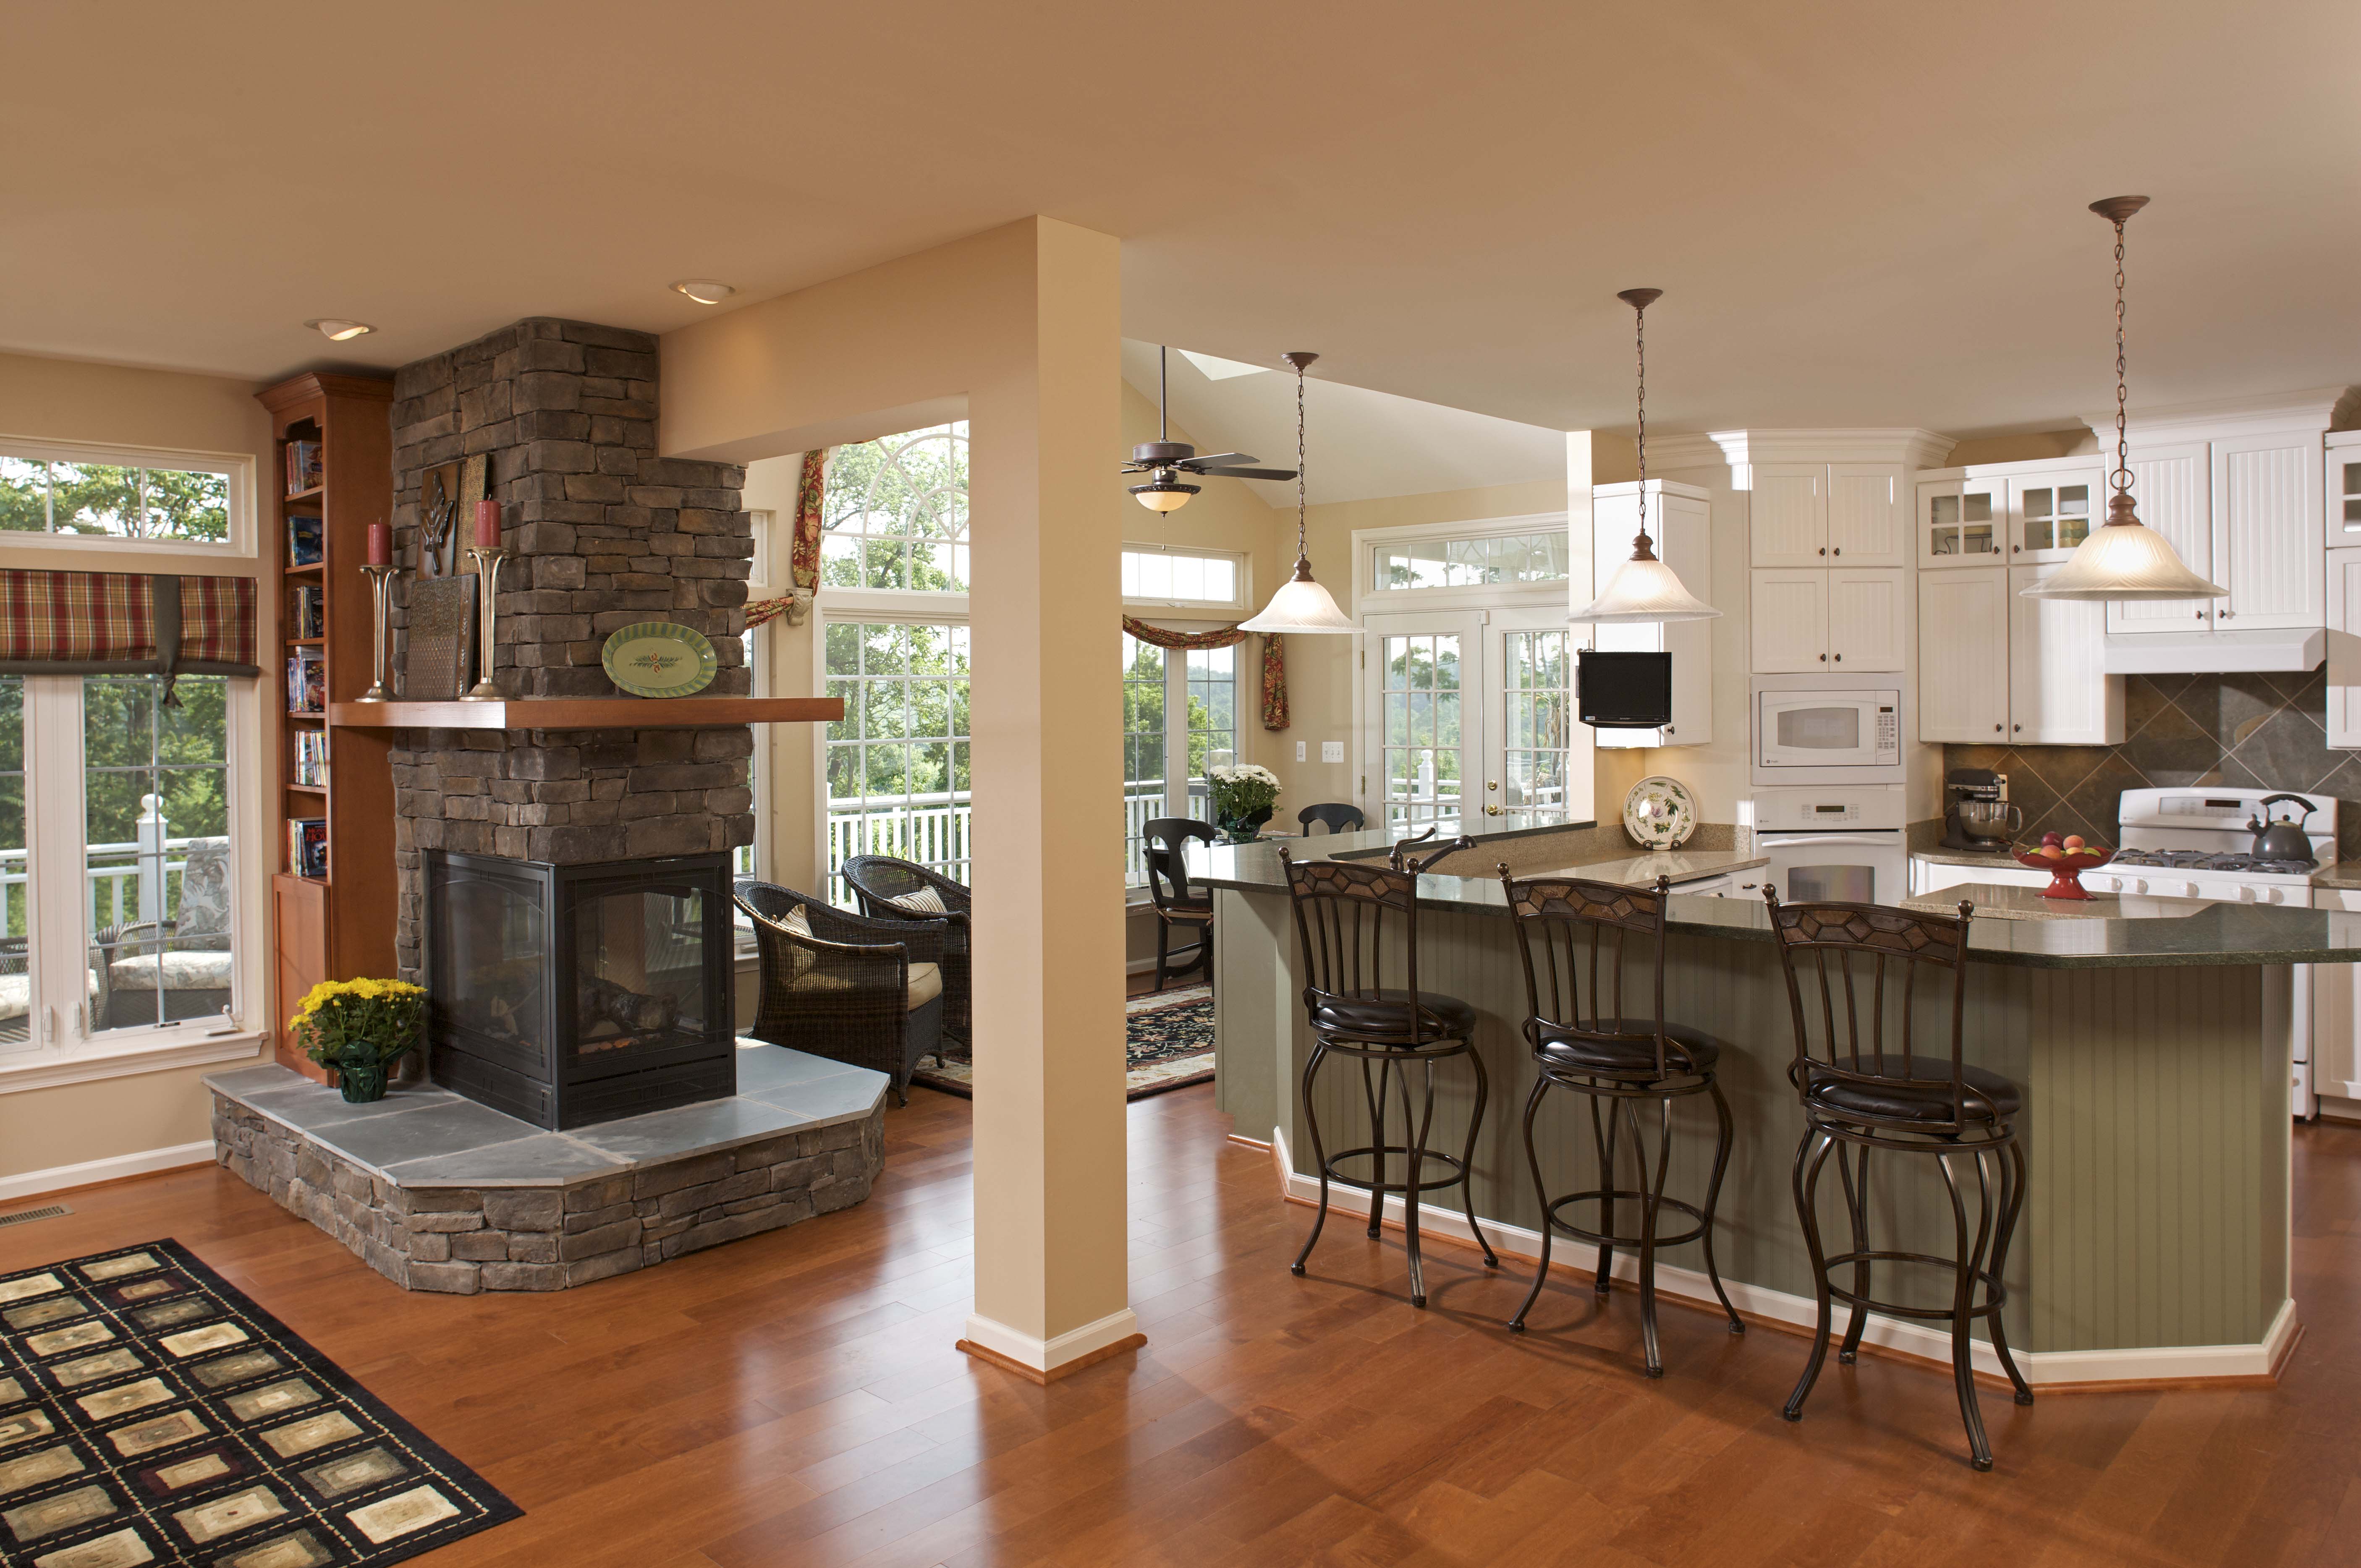 Choosing a Remodeling Project That Adds Value to a Home